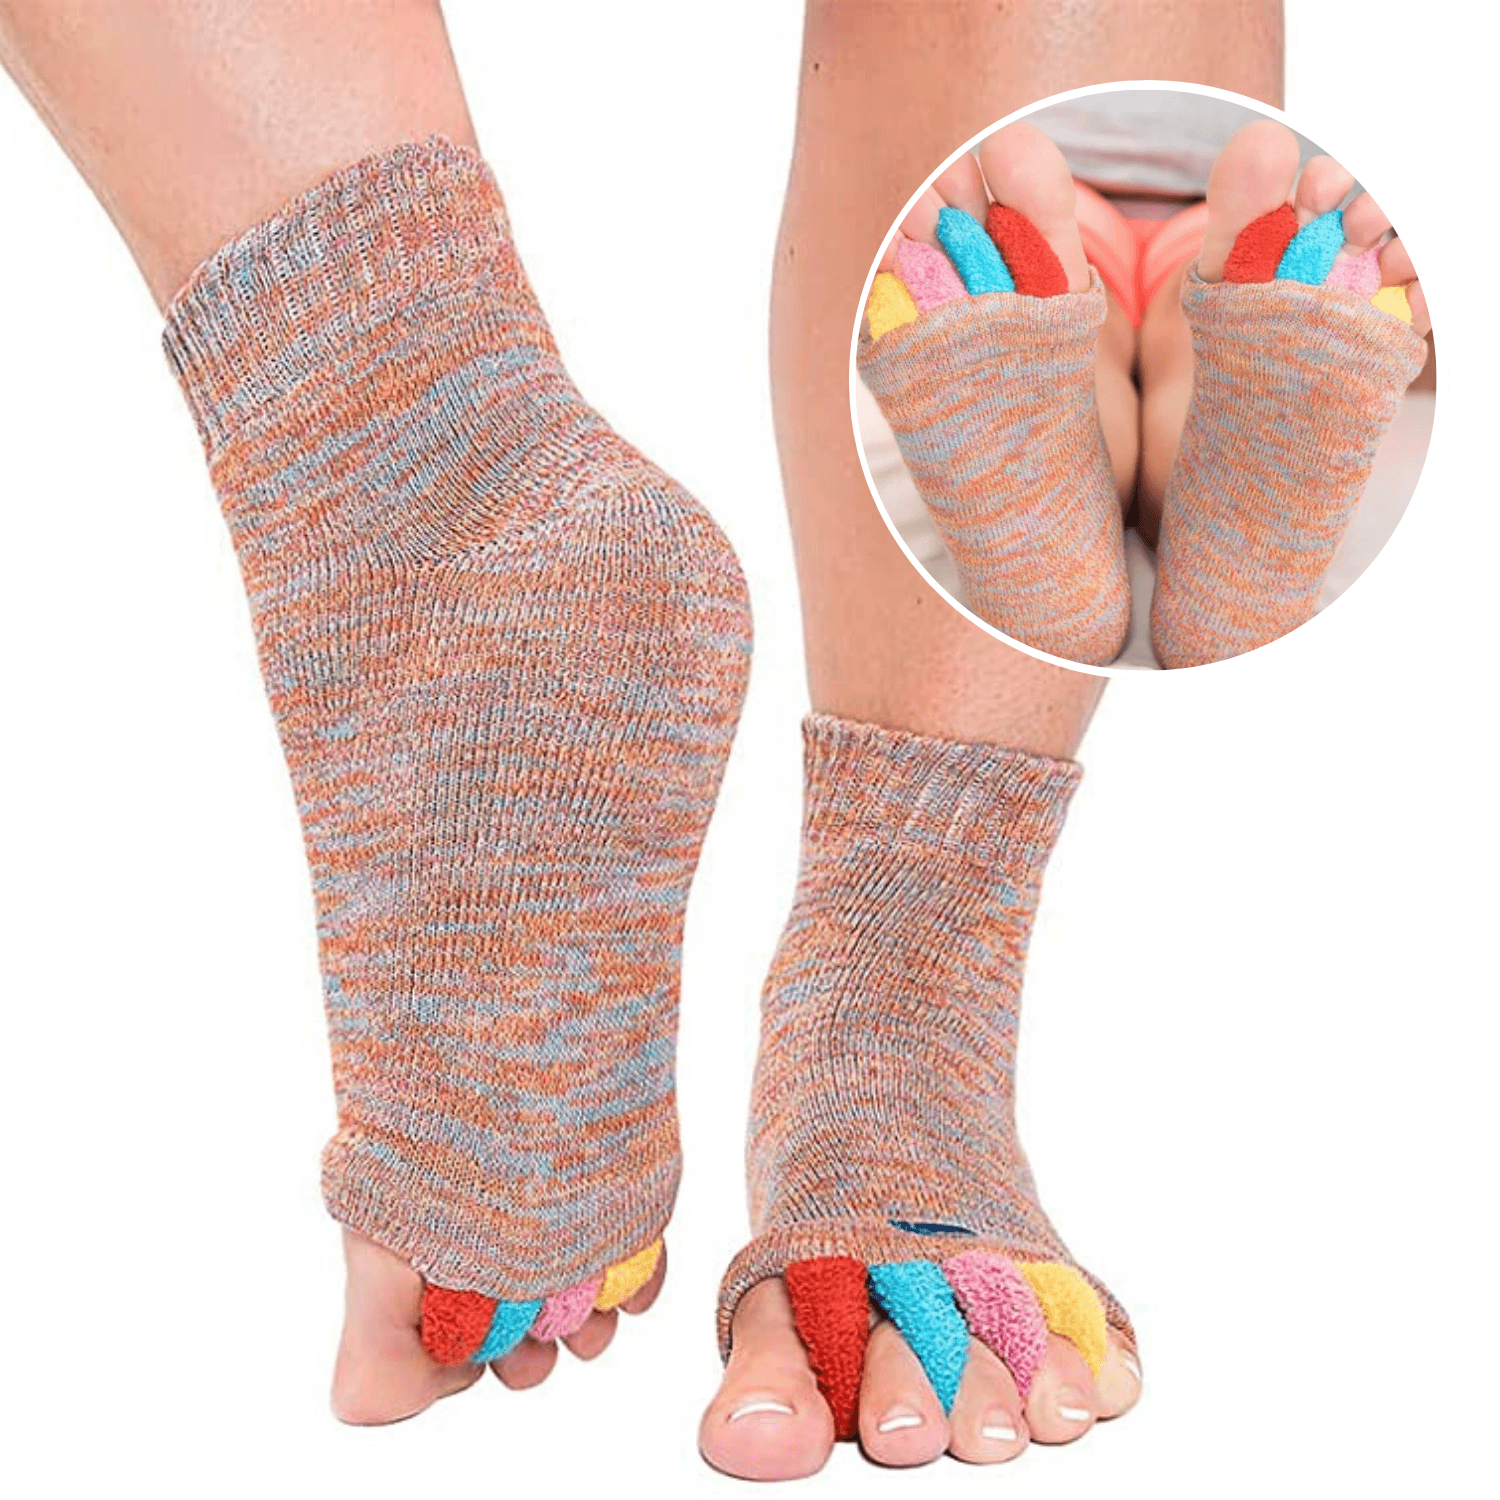 Toe Separator Socks by Stretch; Toe Spacer Foot Alignment Sock